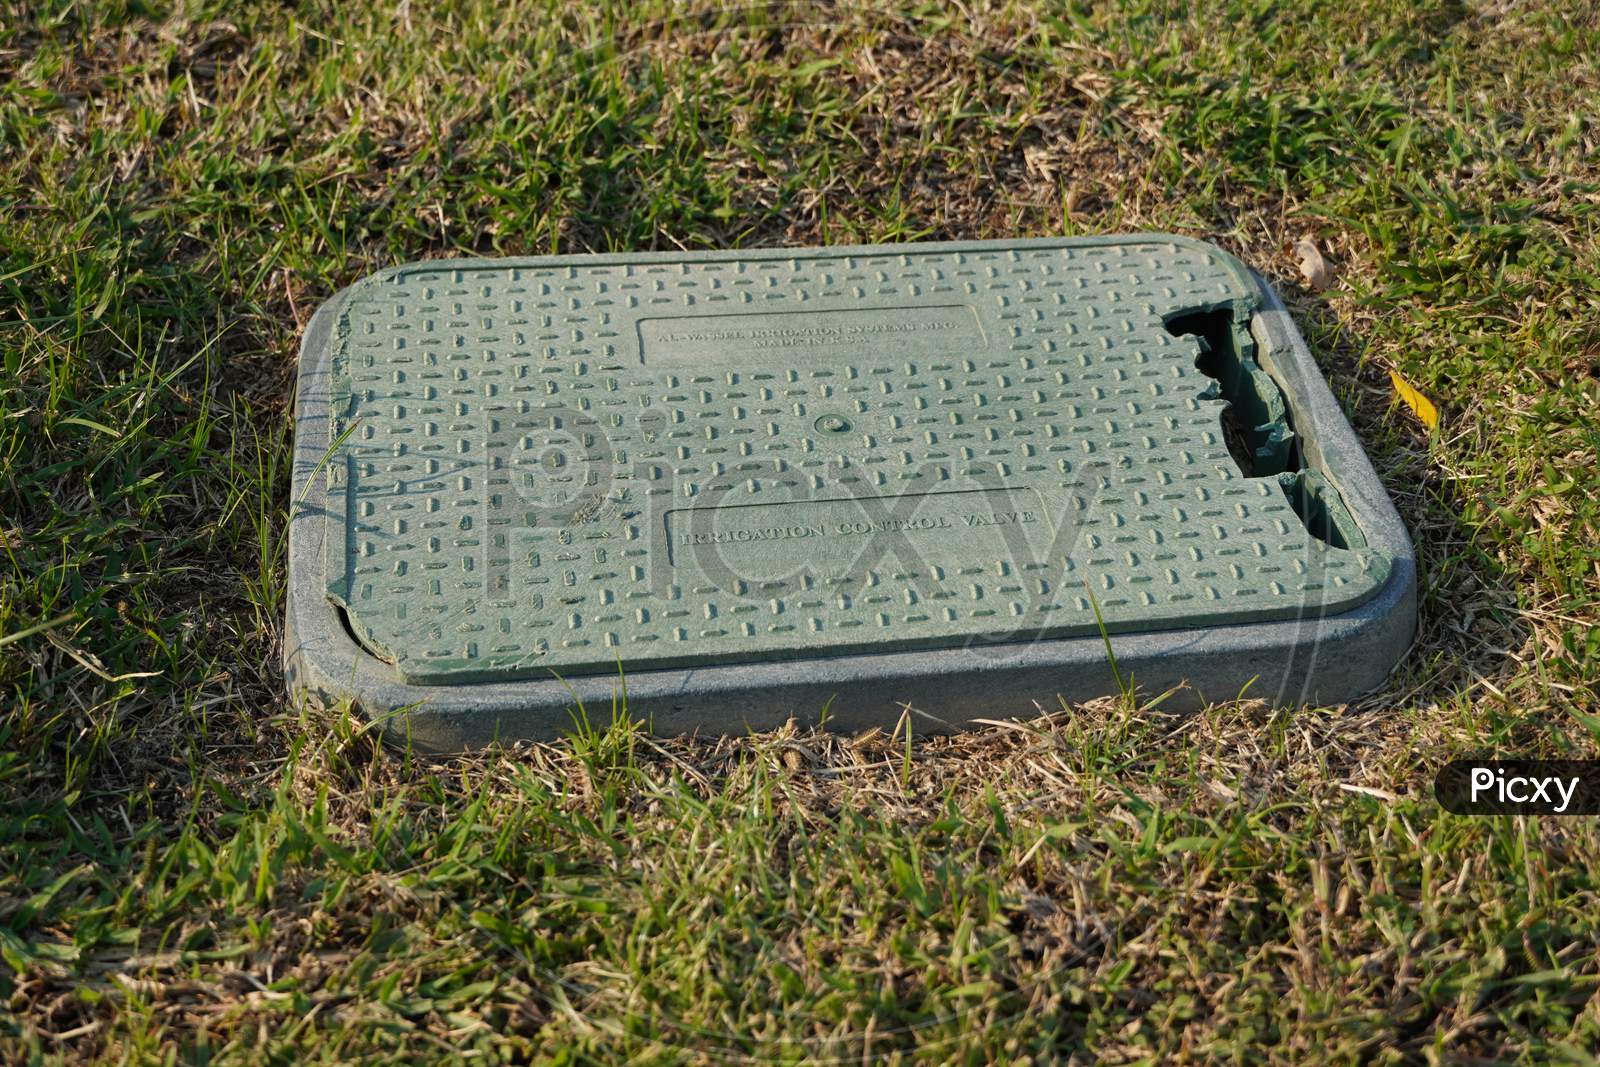 Dubai Uae December 2019 An Old Broken Plastic Box For Irrigation Control Valve With Background Of Dry Green, Brown Grass. Green Valve With Automatic Watering System Installed Under Outdoor Lawn.